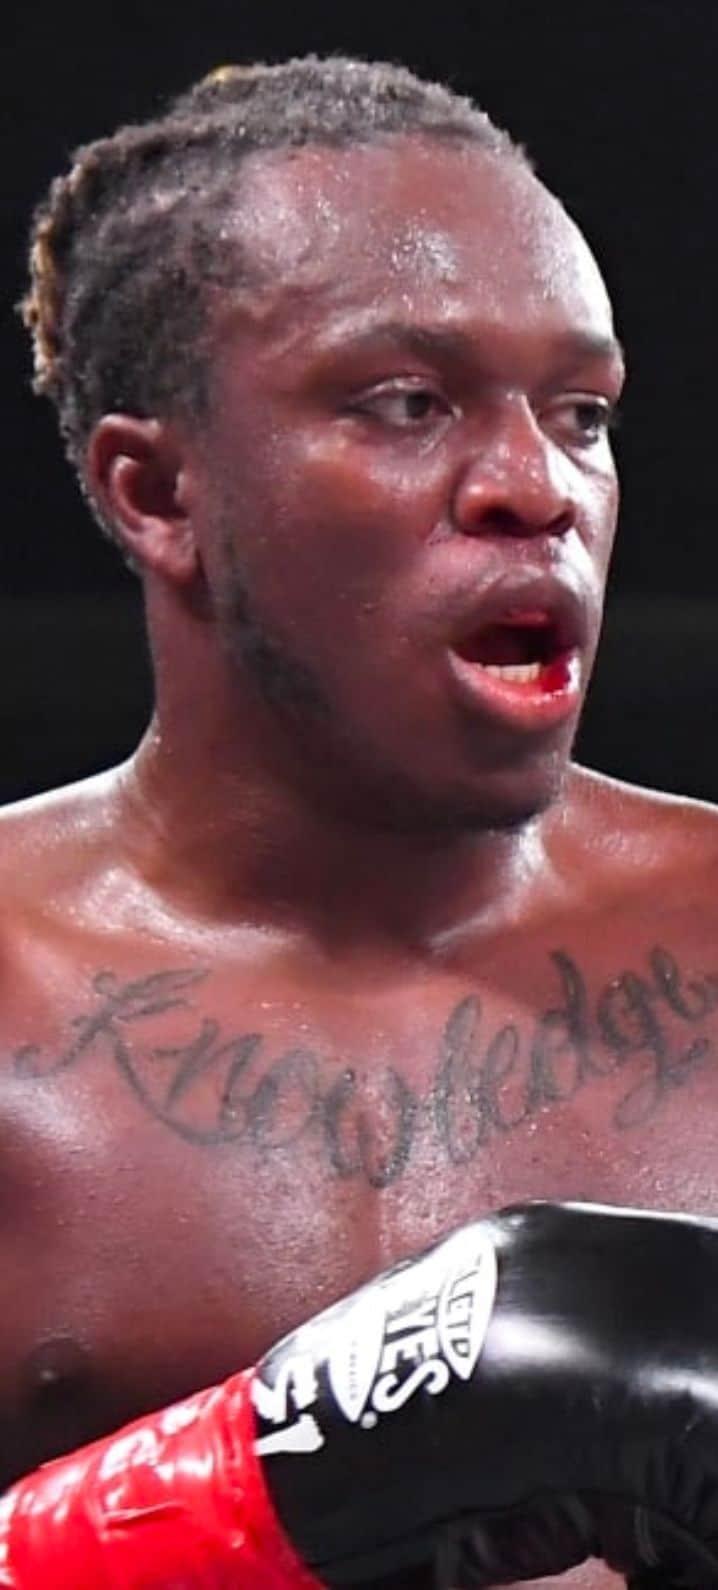 KSI wearing 'Prime' chain in boxing ring with Tommy Fury